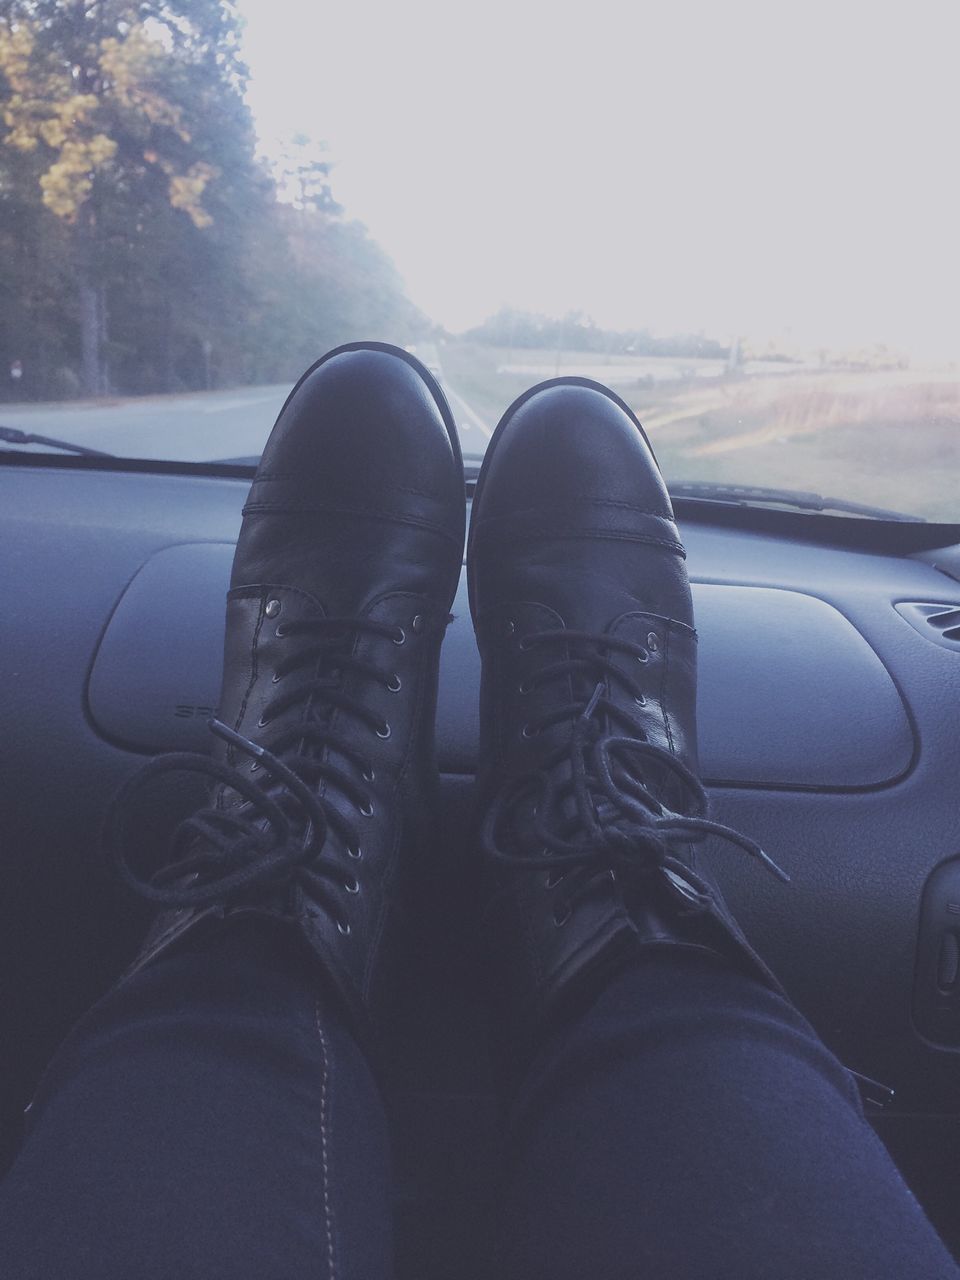 low section, shoe, person, personal perspective, transportation, footwear, jeans, mode of transport, lifestyles, human foot, part of, land vehicle, vehicle interior, leisure activity, car, men, car interior